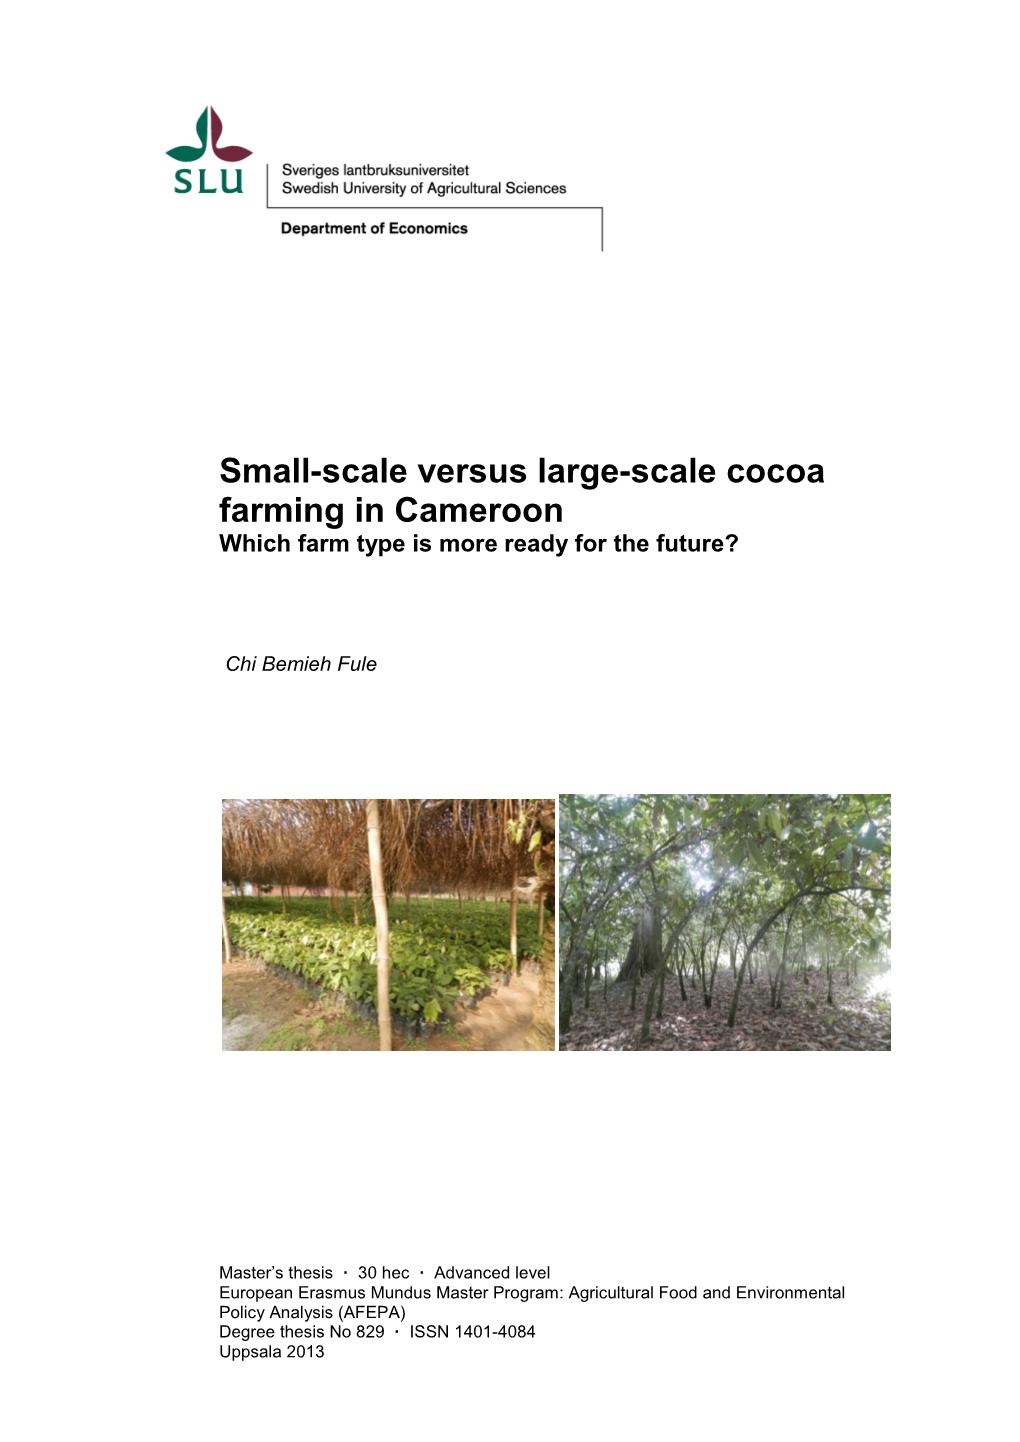 Small-Scale Versus Large-Scale Cocoa Farming in Cameroon Which Farm Type Is More Ready for the Future?